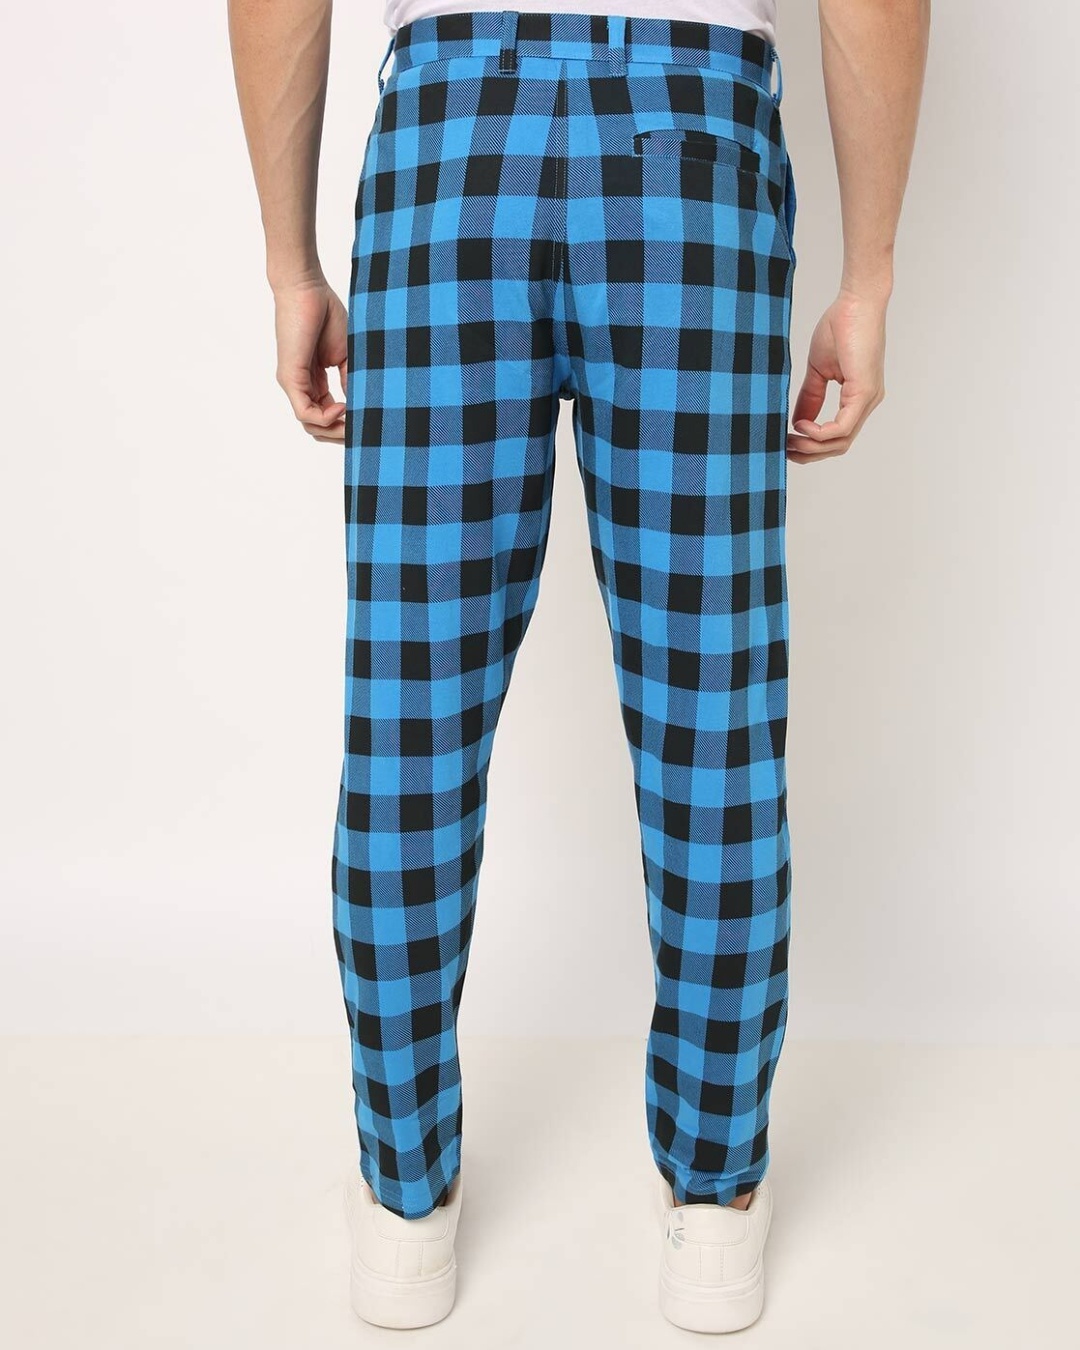 Shop Men's Blue & Black Checked Tapered Fit Chinos-Design